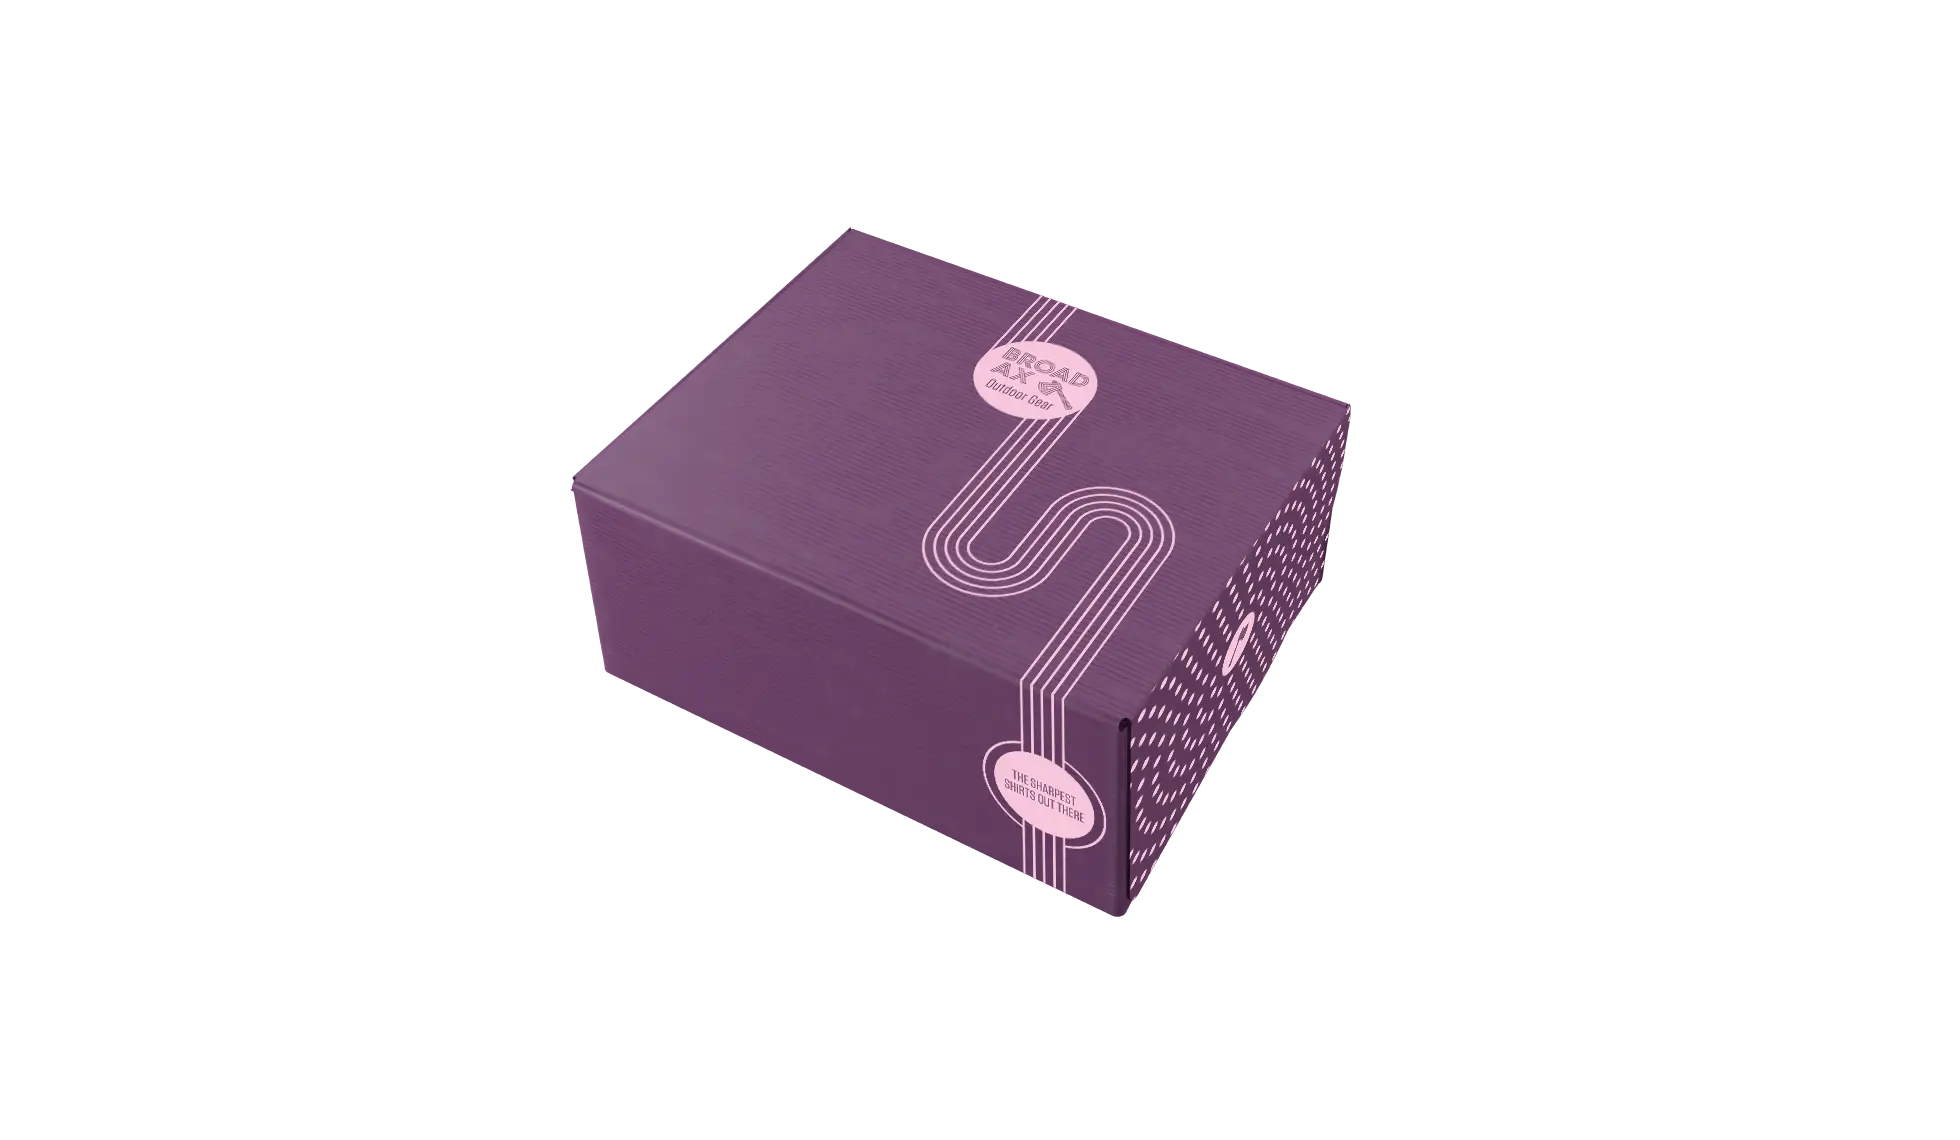 A purple box with an outdoor gear company’s branding.